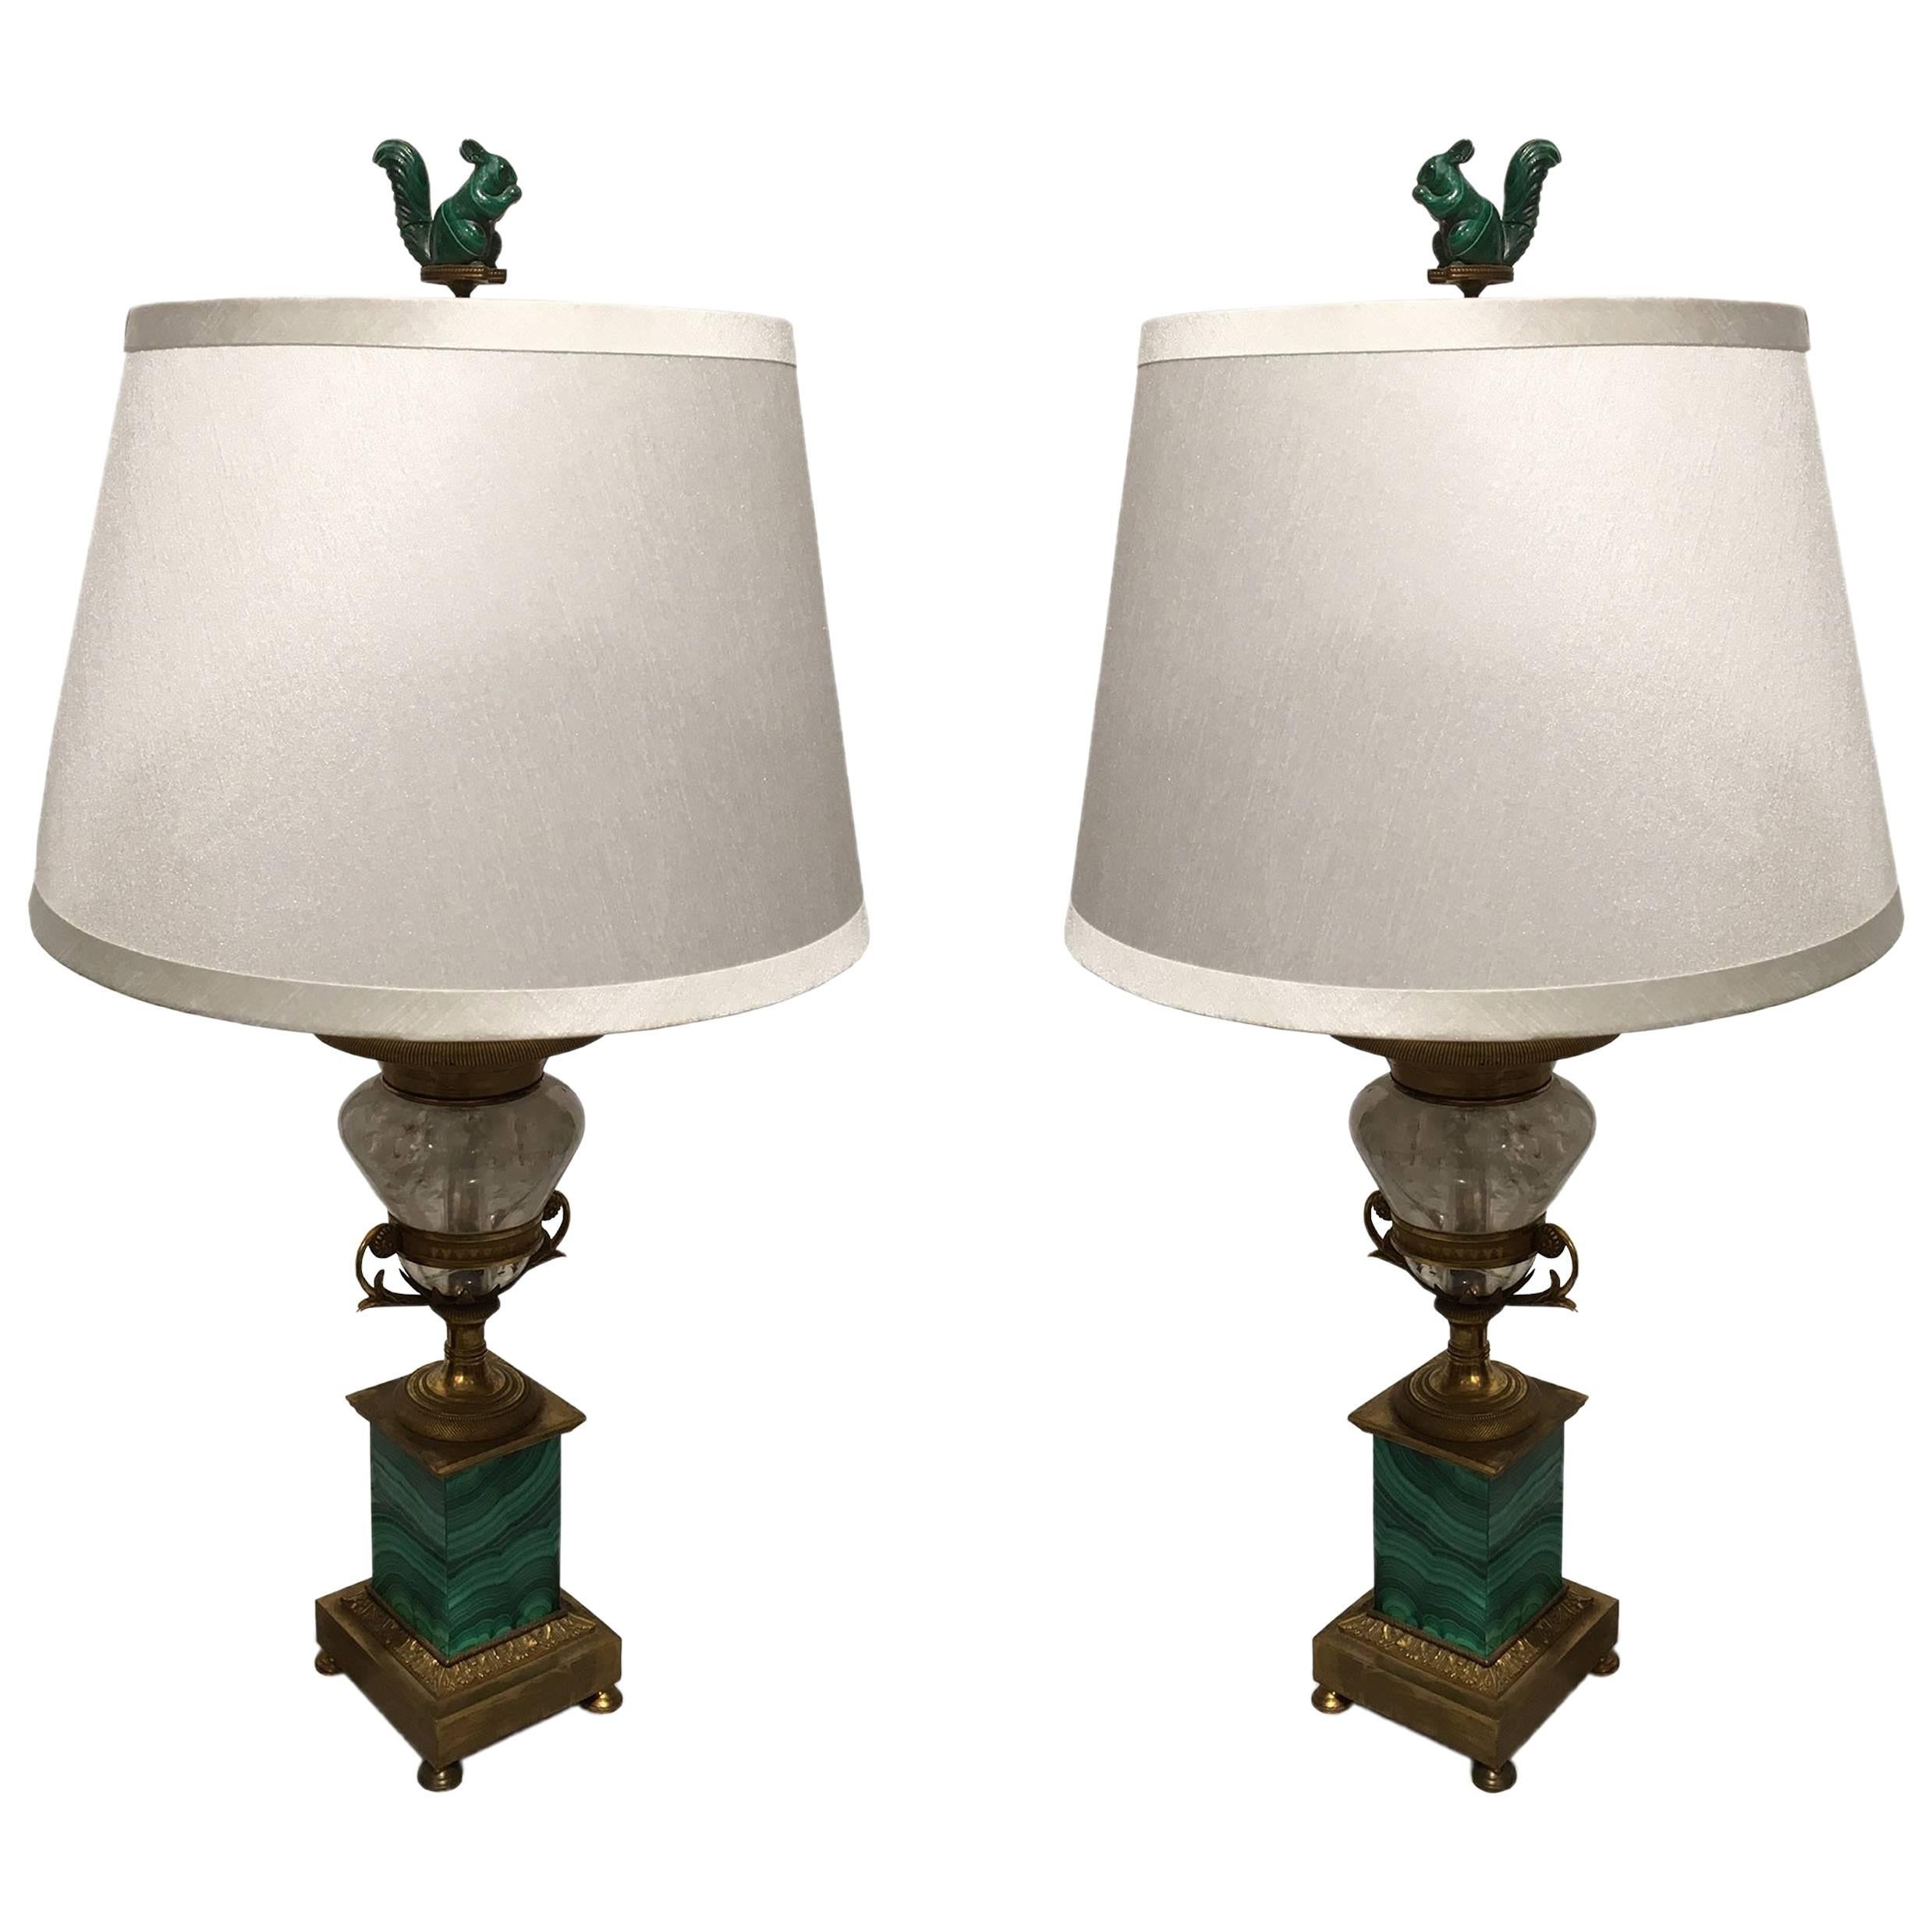 Pair of French Empire Style Mid-19th C. Lamps